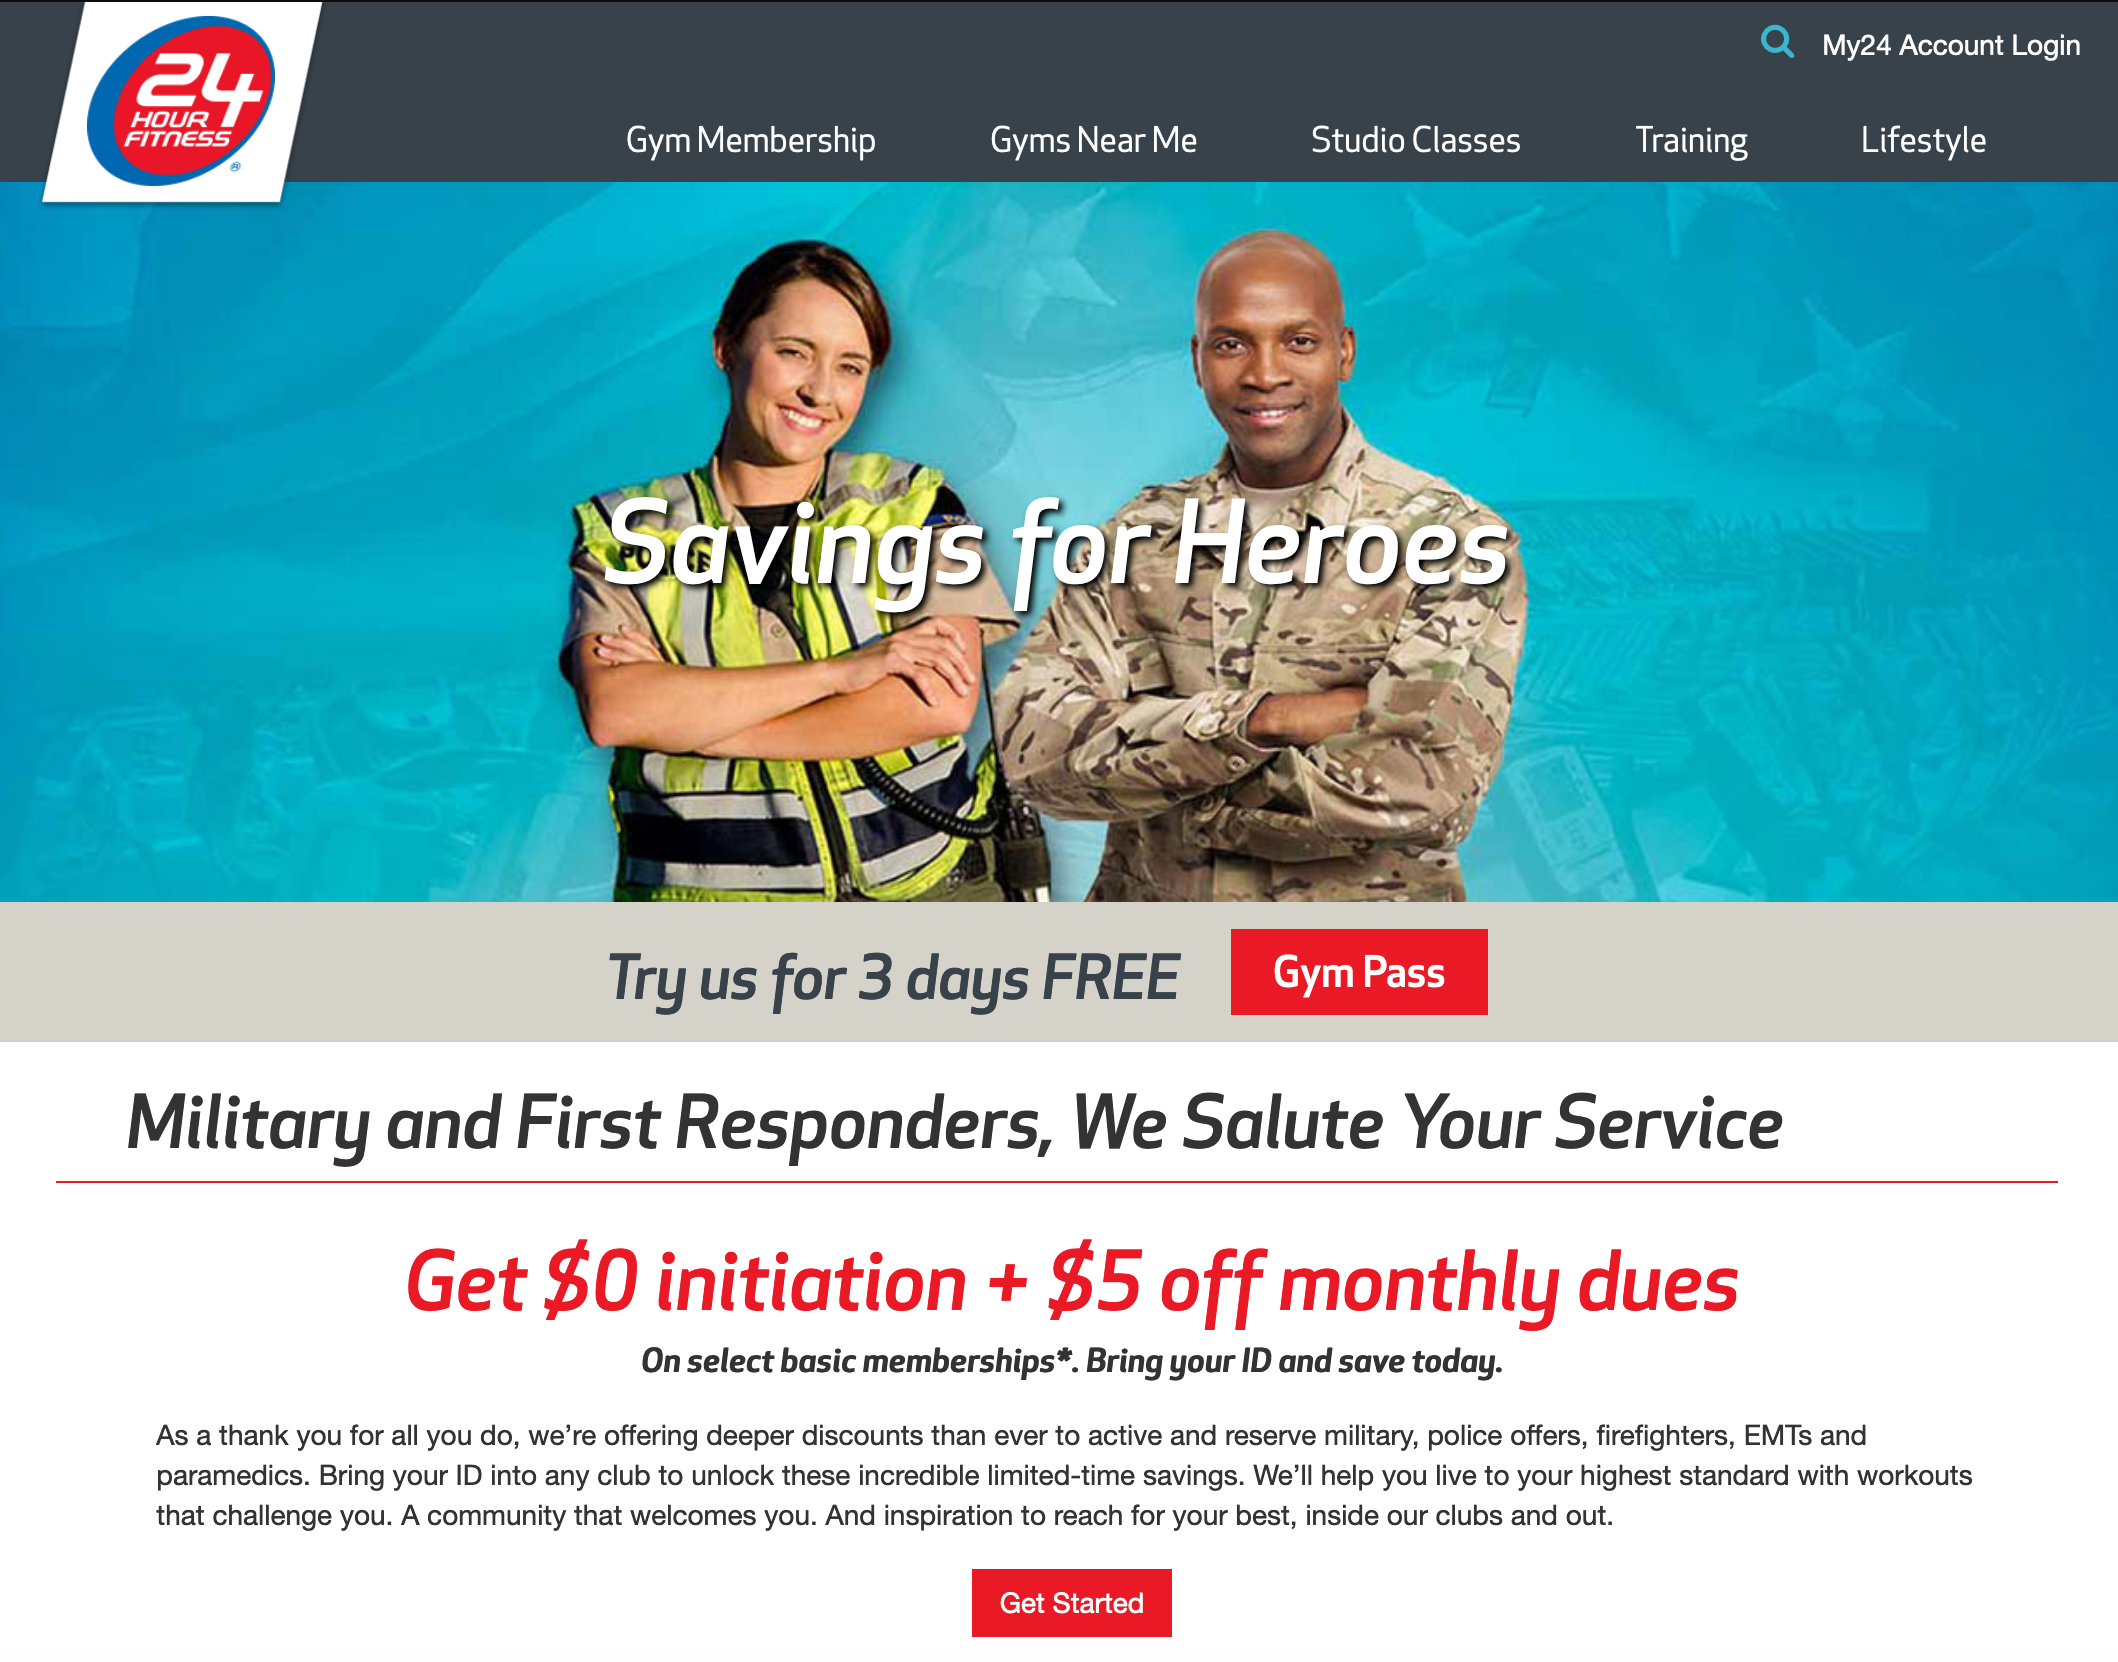 24 Hour Fitness Military Discount 0 Initiation Military Veteran Discounts